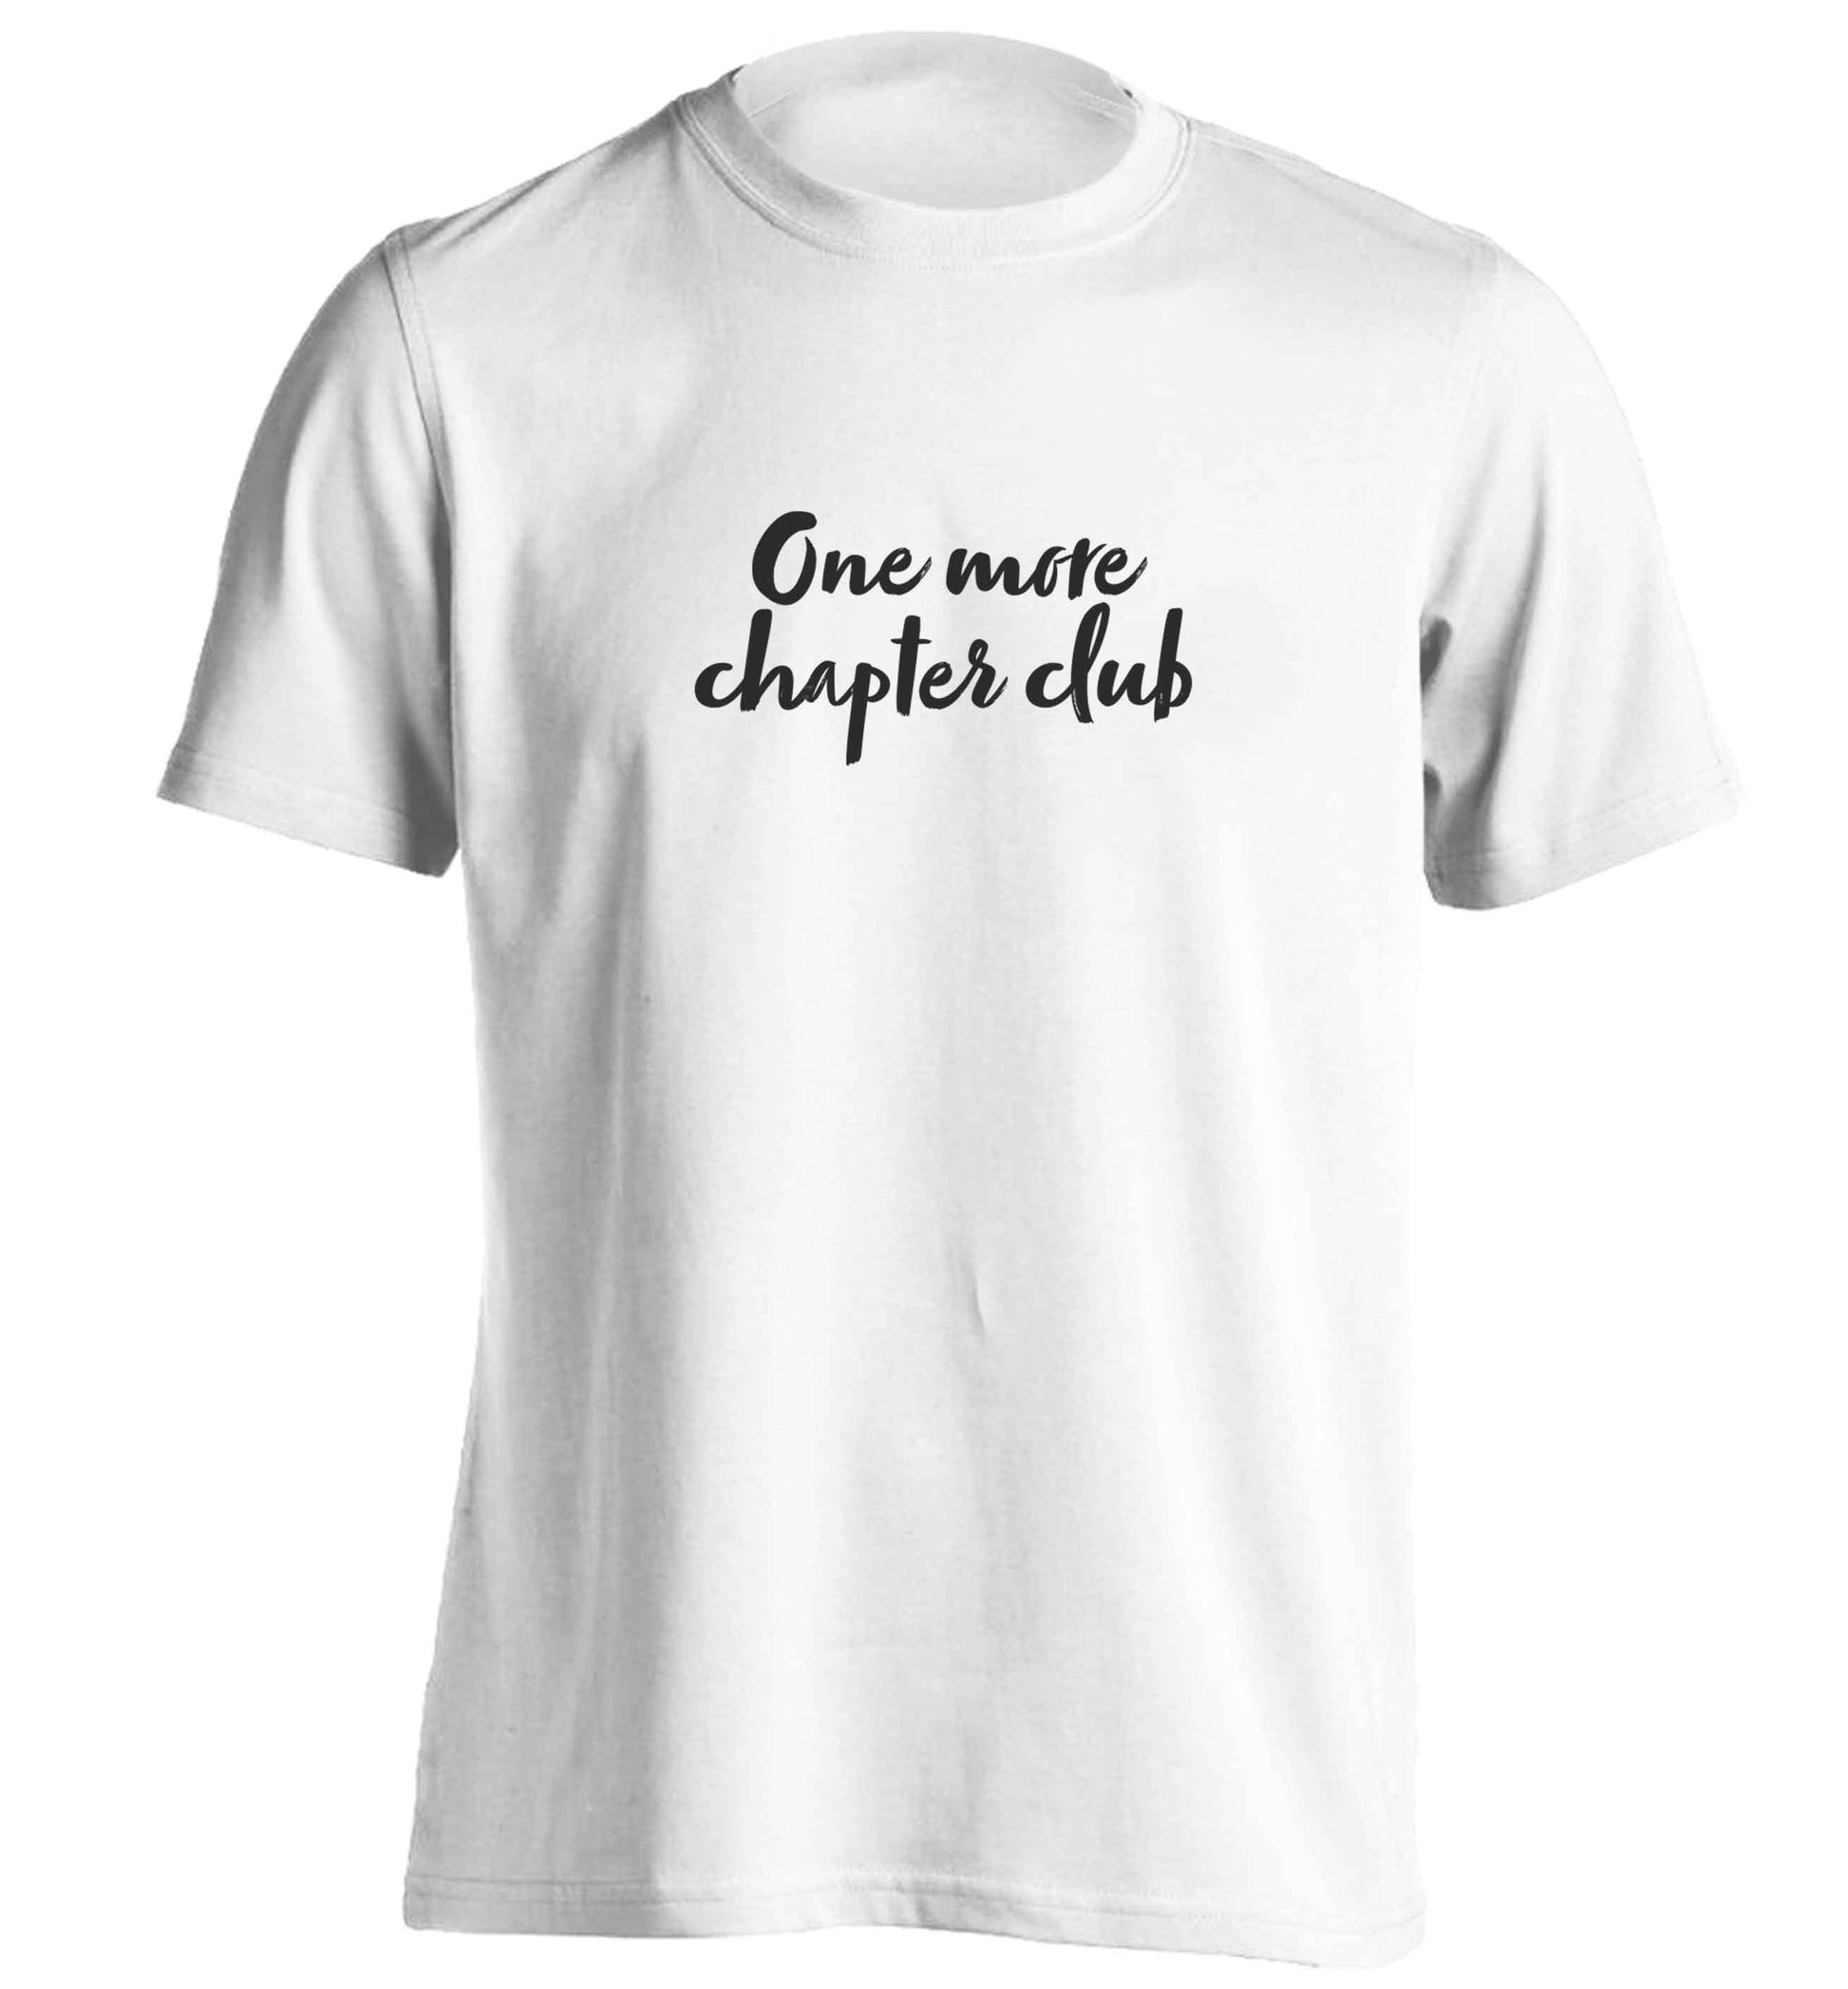 One more chapter club Kit adults unisex white Tshirt 2XL